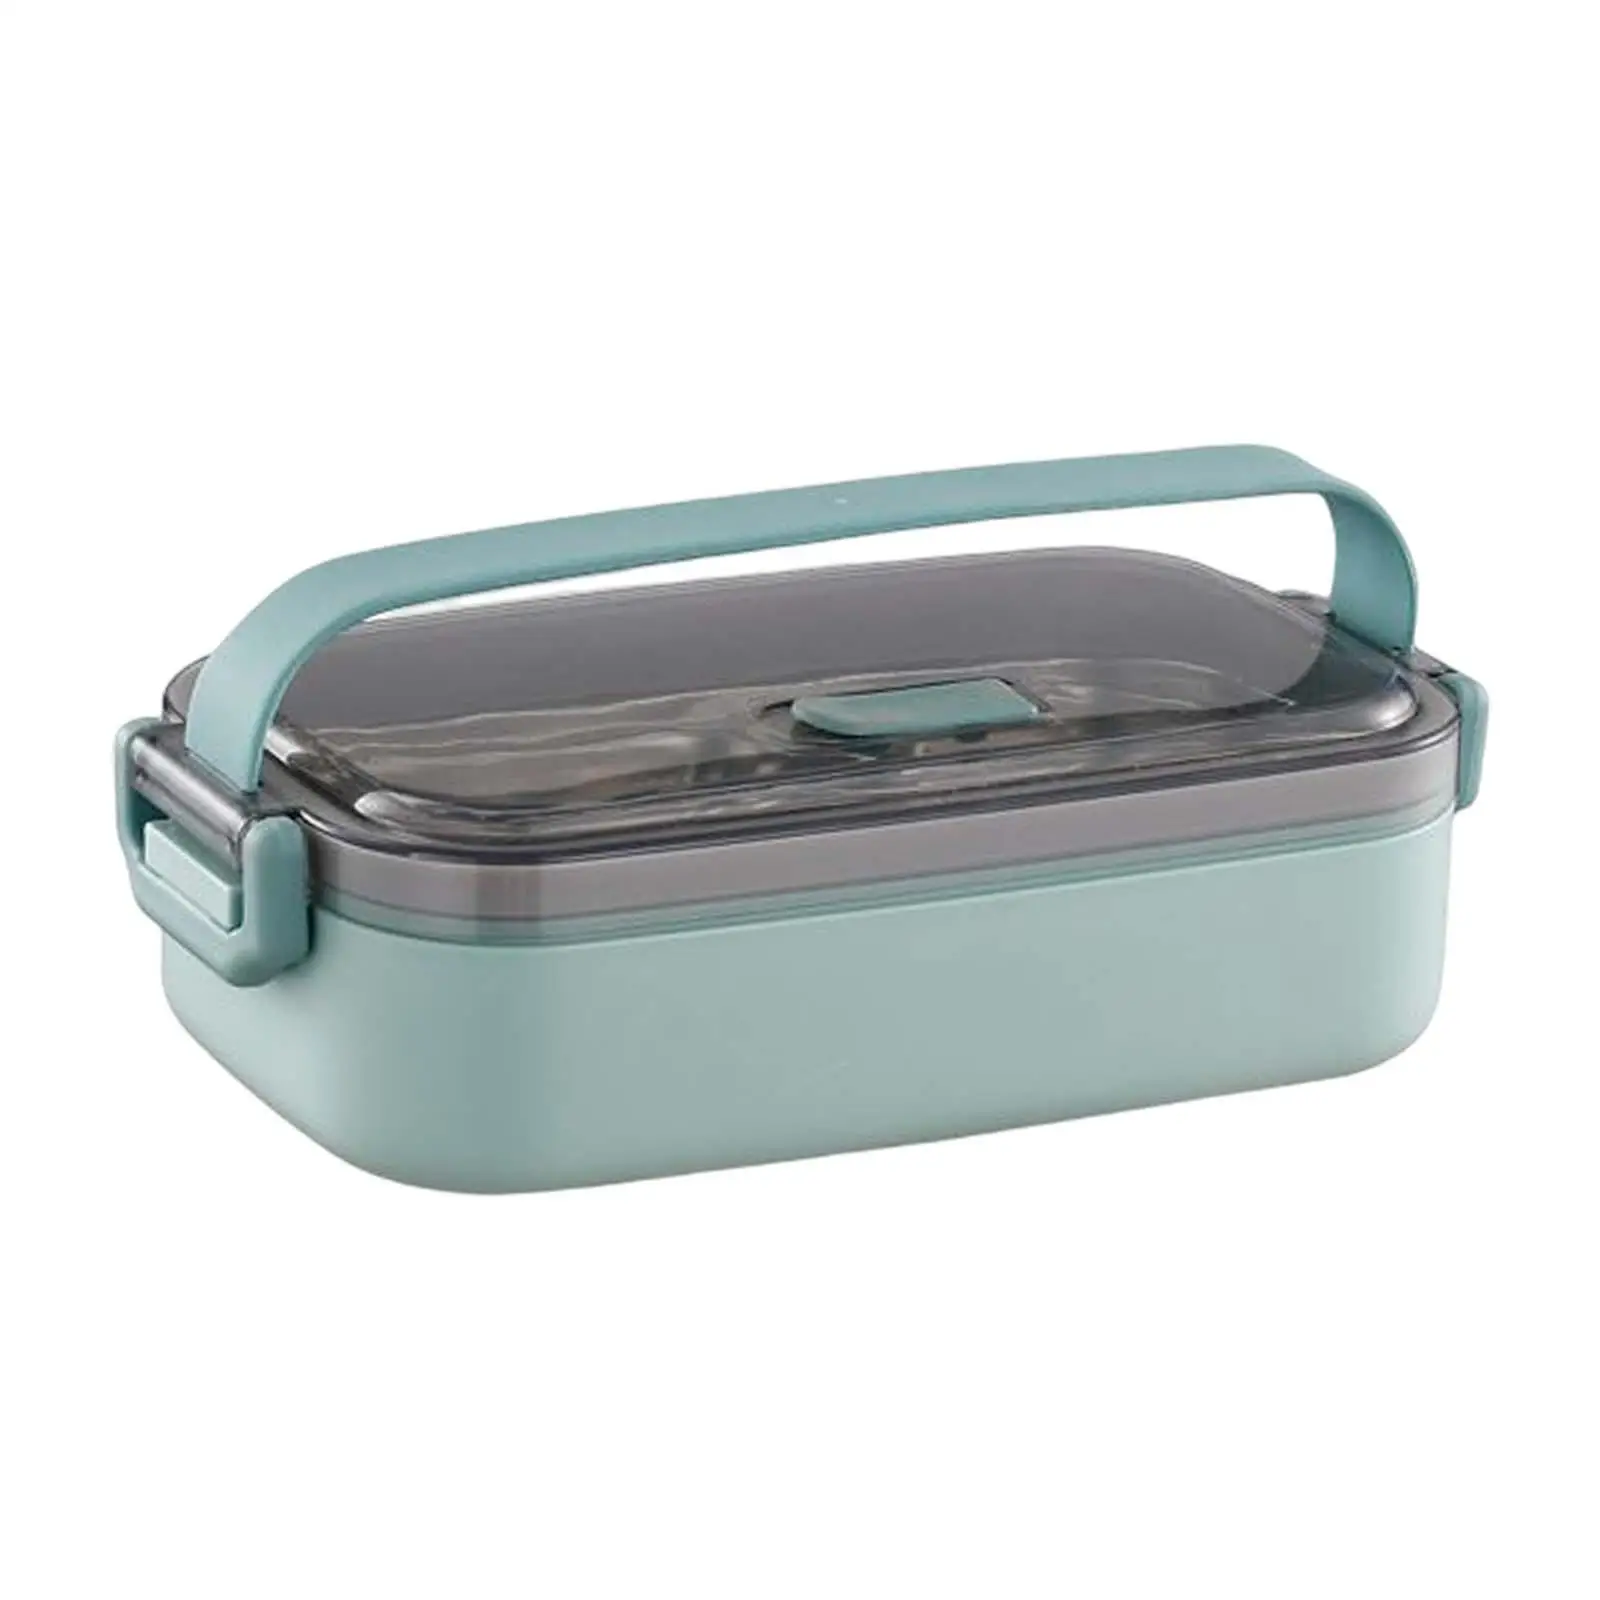 Japanese Style Lunch Box with Handle Large Capacity Bento Box Multifunctional Leakproof for Home Office Hiking Camping Travel